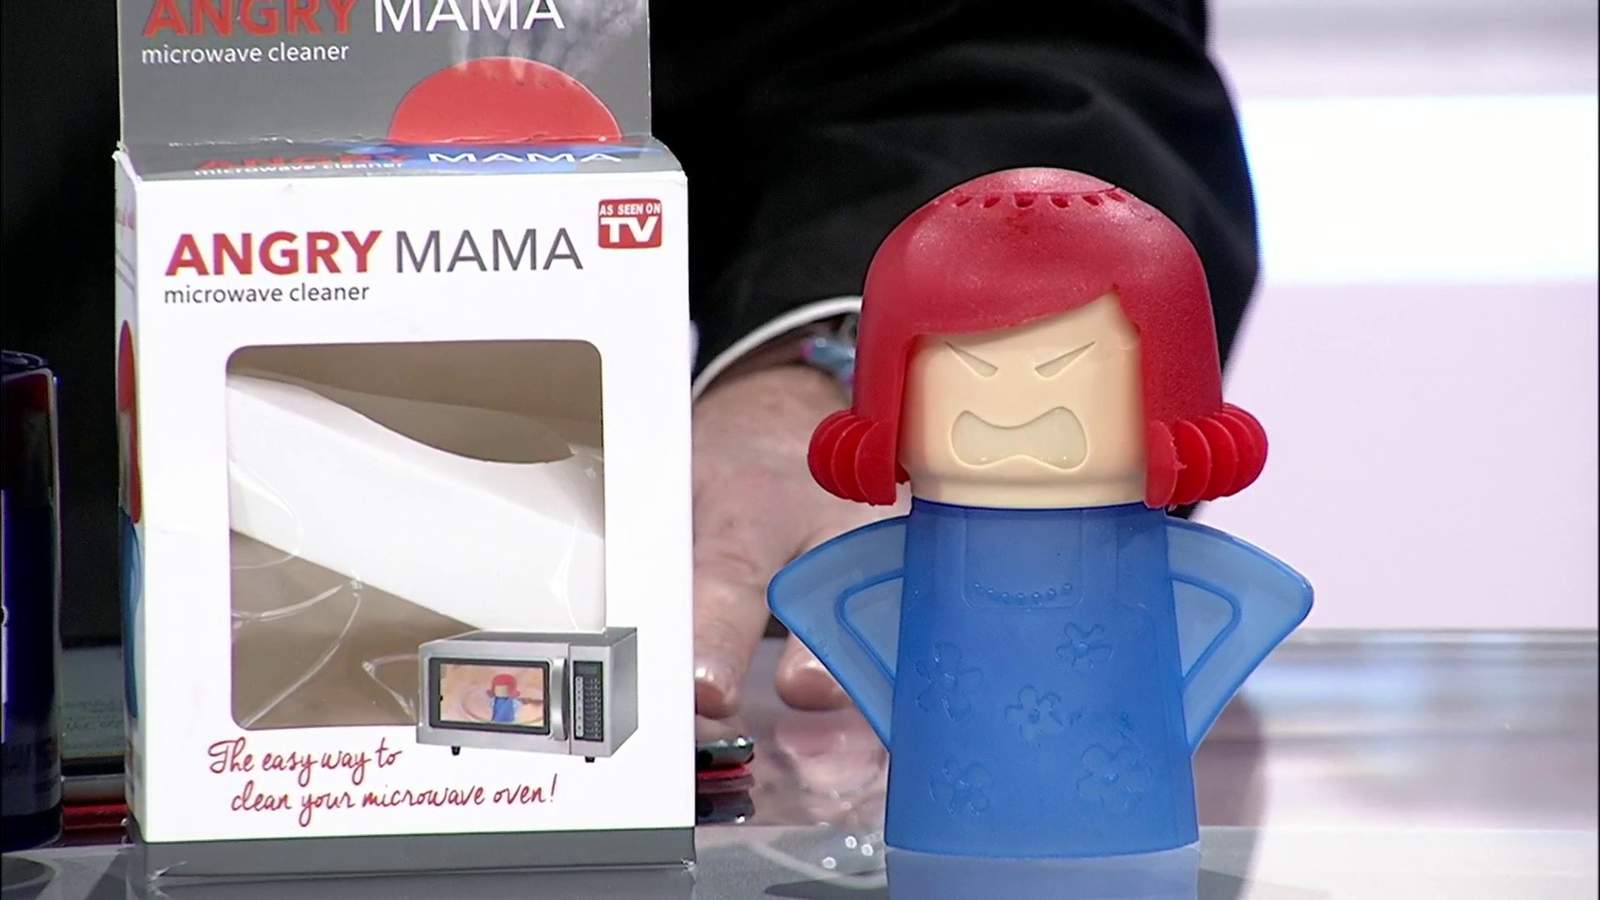 Deal or Dud: Angry Mama Microwave Cleaner